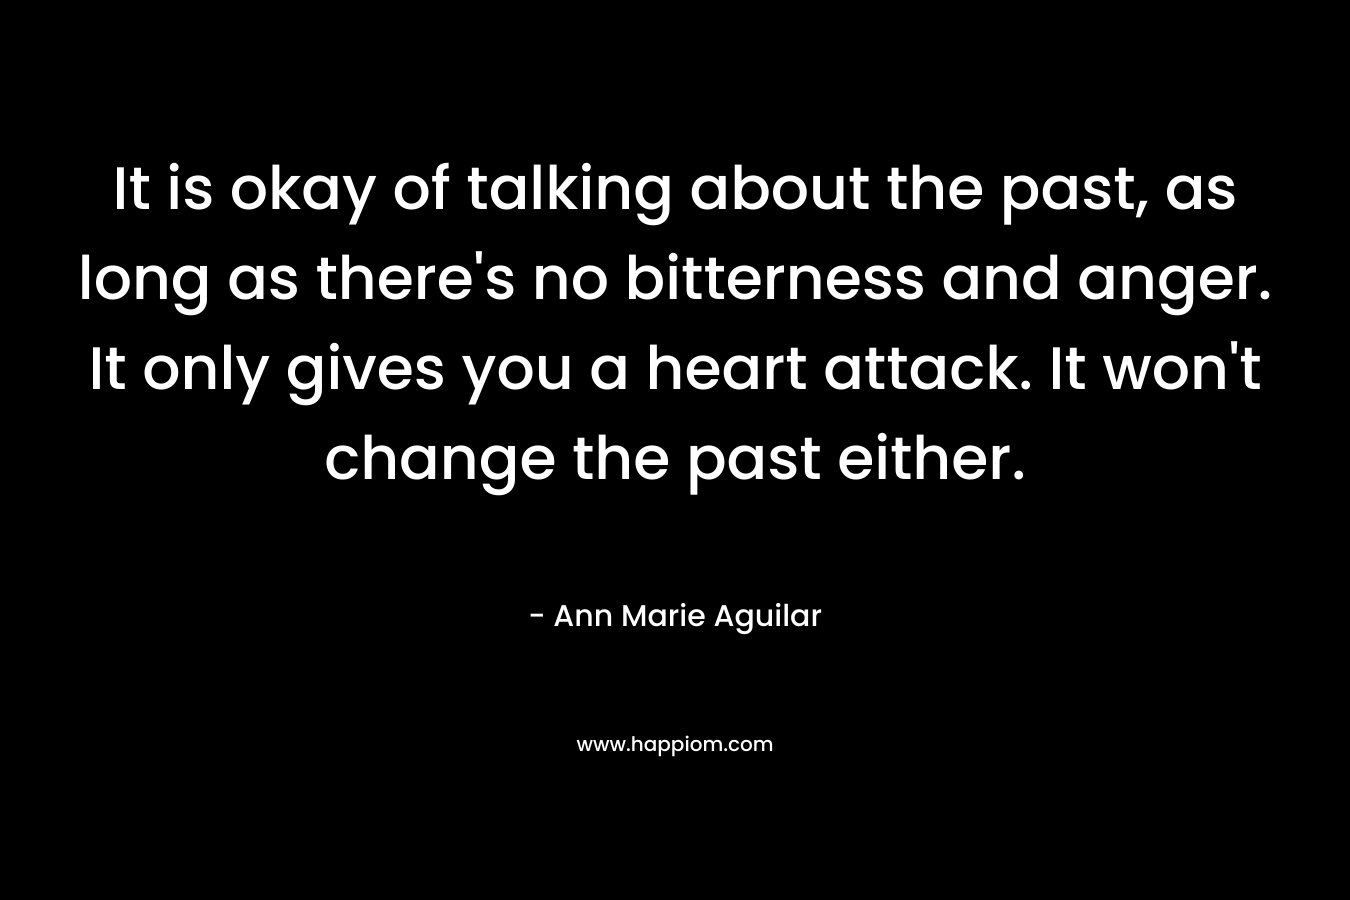 It is okay of talking about the past, as long as there's no bitterness and anger. It only gives you a heart attack. It won't change the past either.